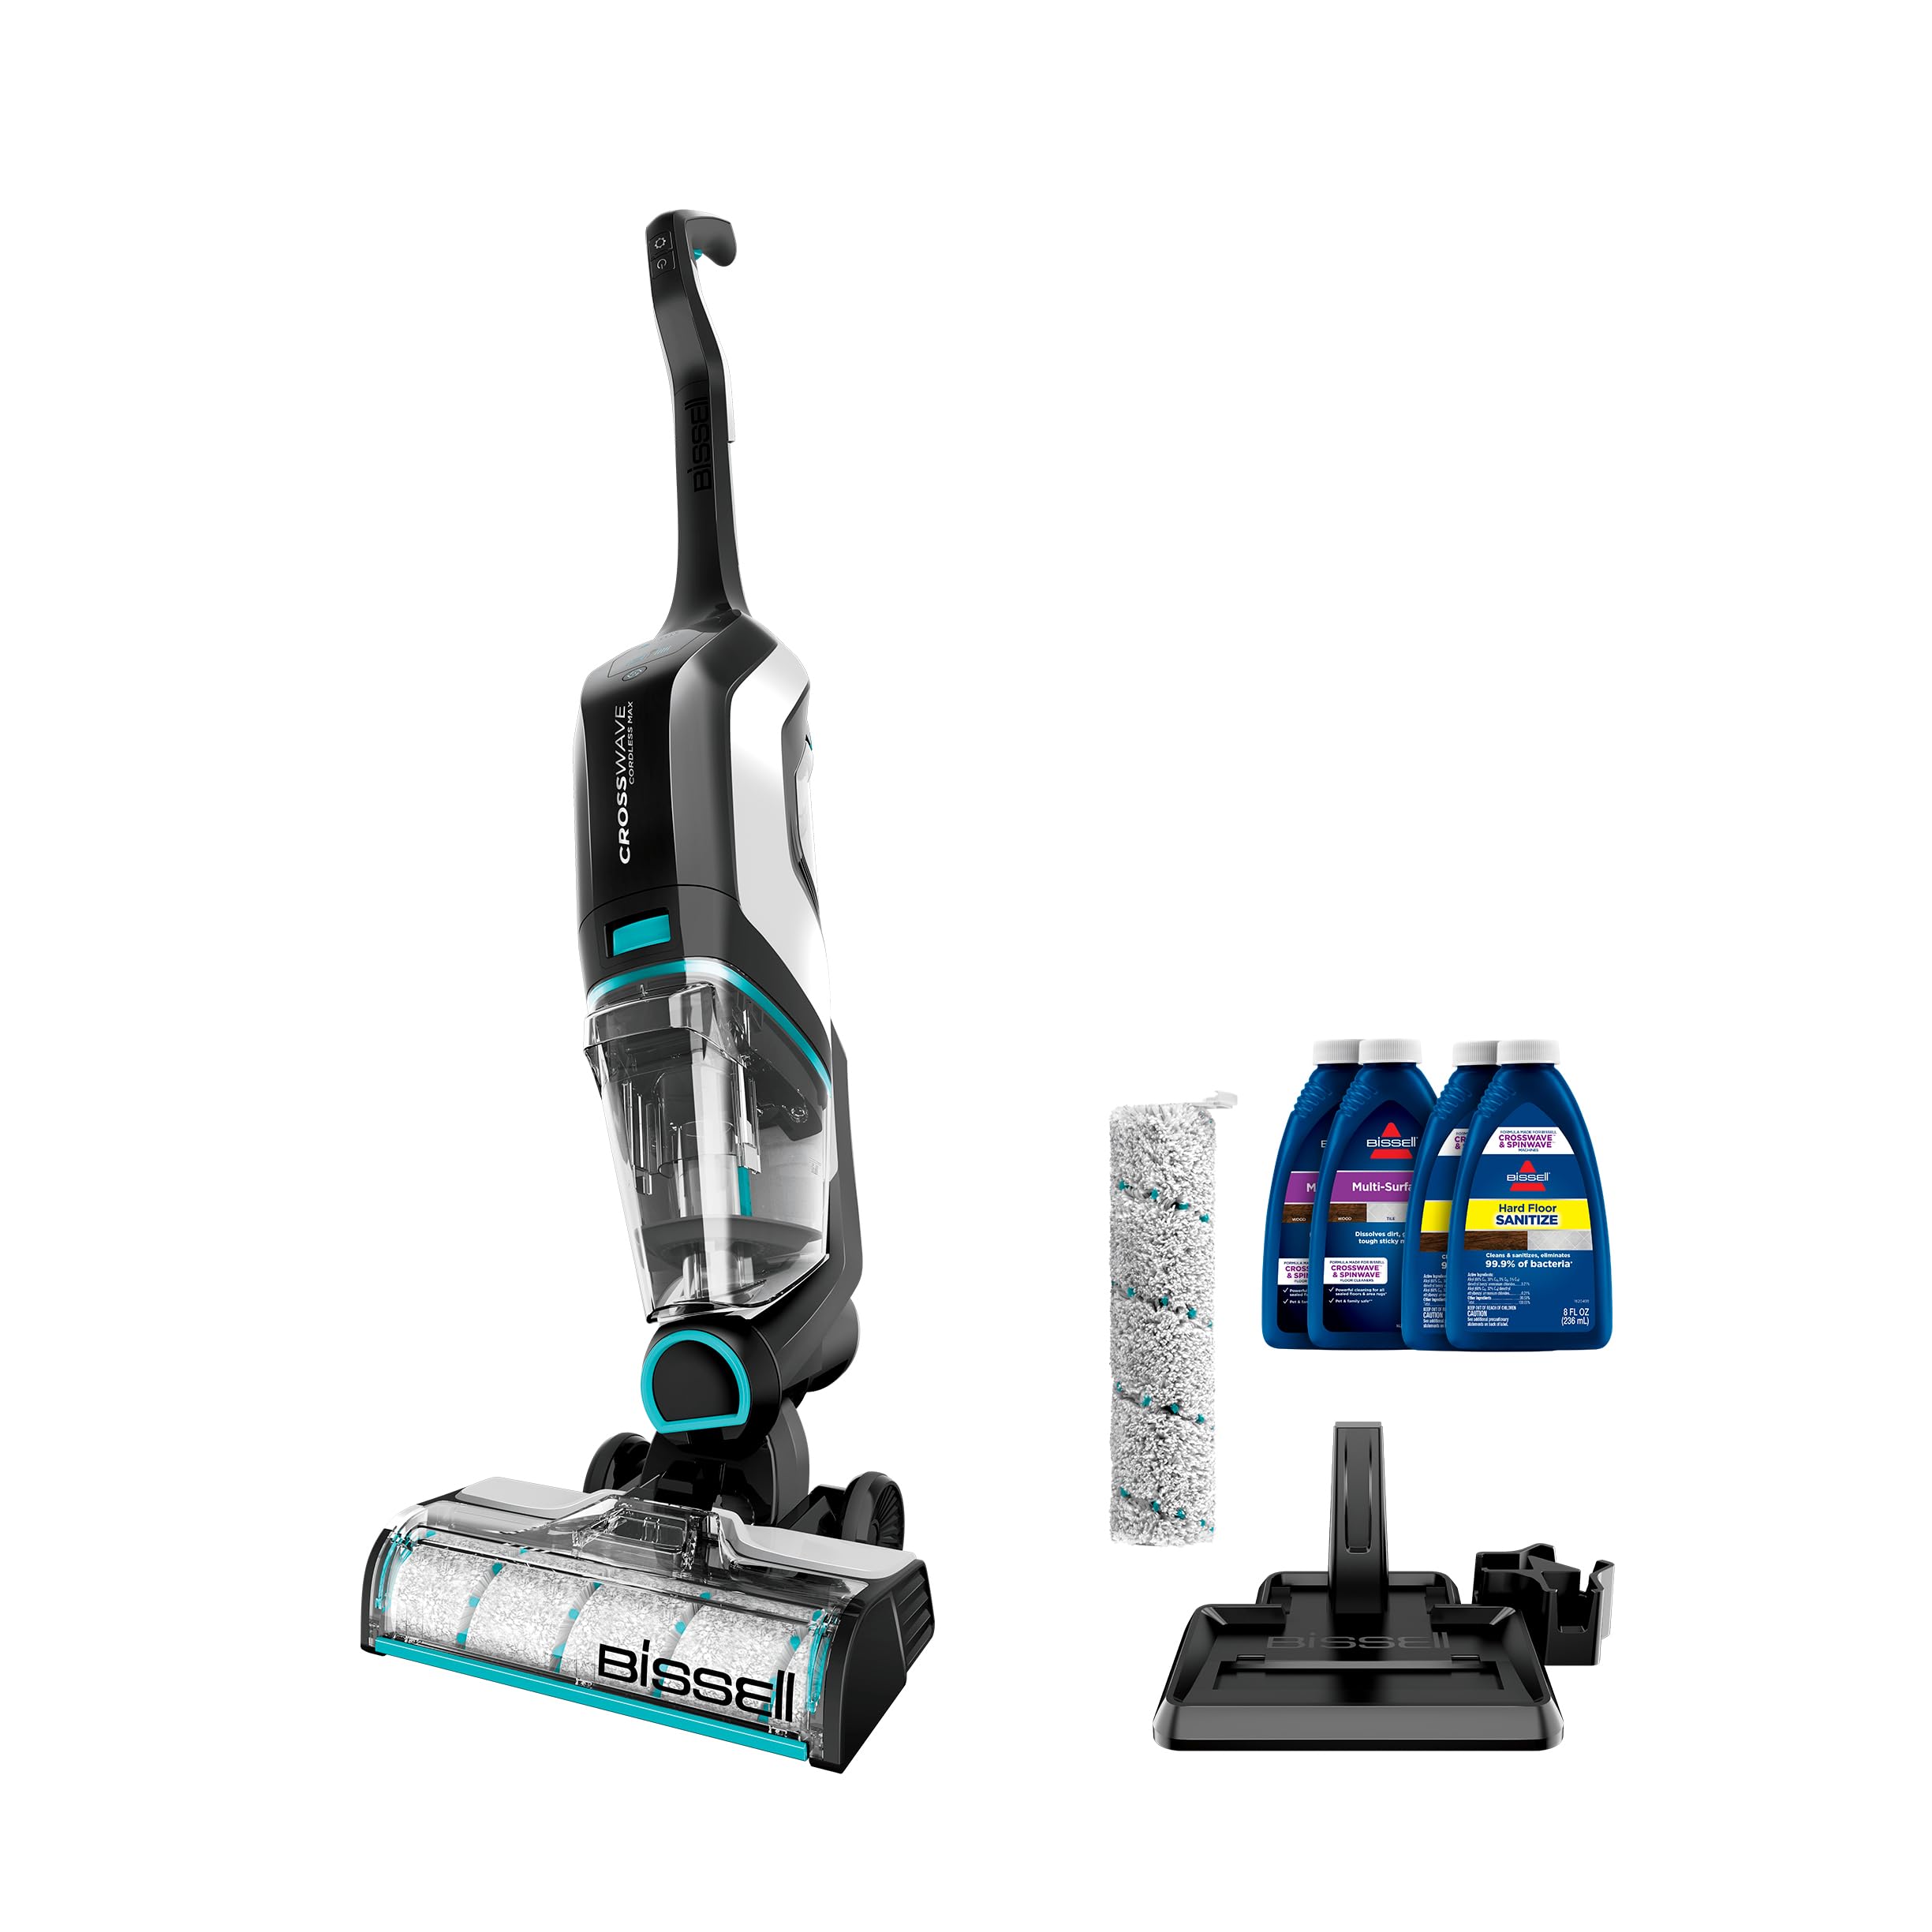 Bissell 2554A CrossWave Cordless Max Wet-Dry Vacuum Cleaner & Mop w/ 2 Brush Rolls, Bissell Formula, Self-Cleaning Docking & Charging Station $200 + Free Shipping